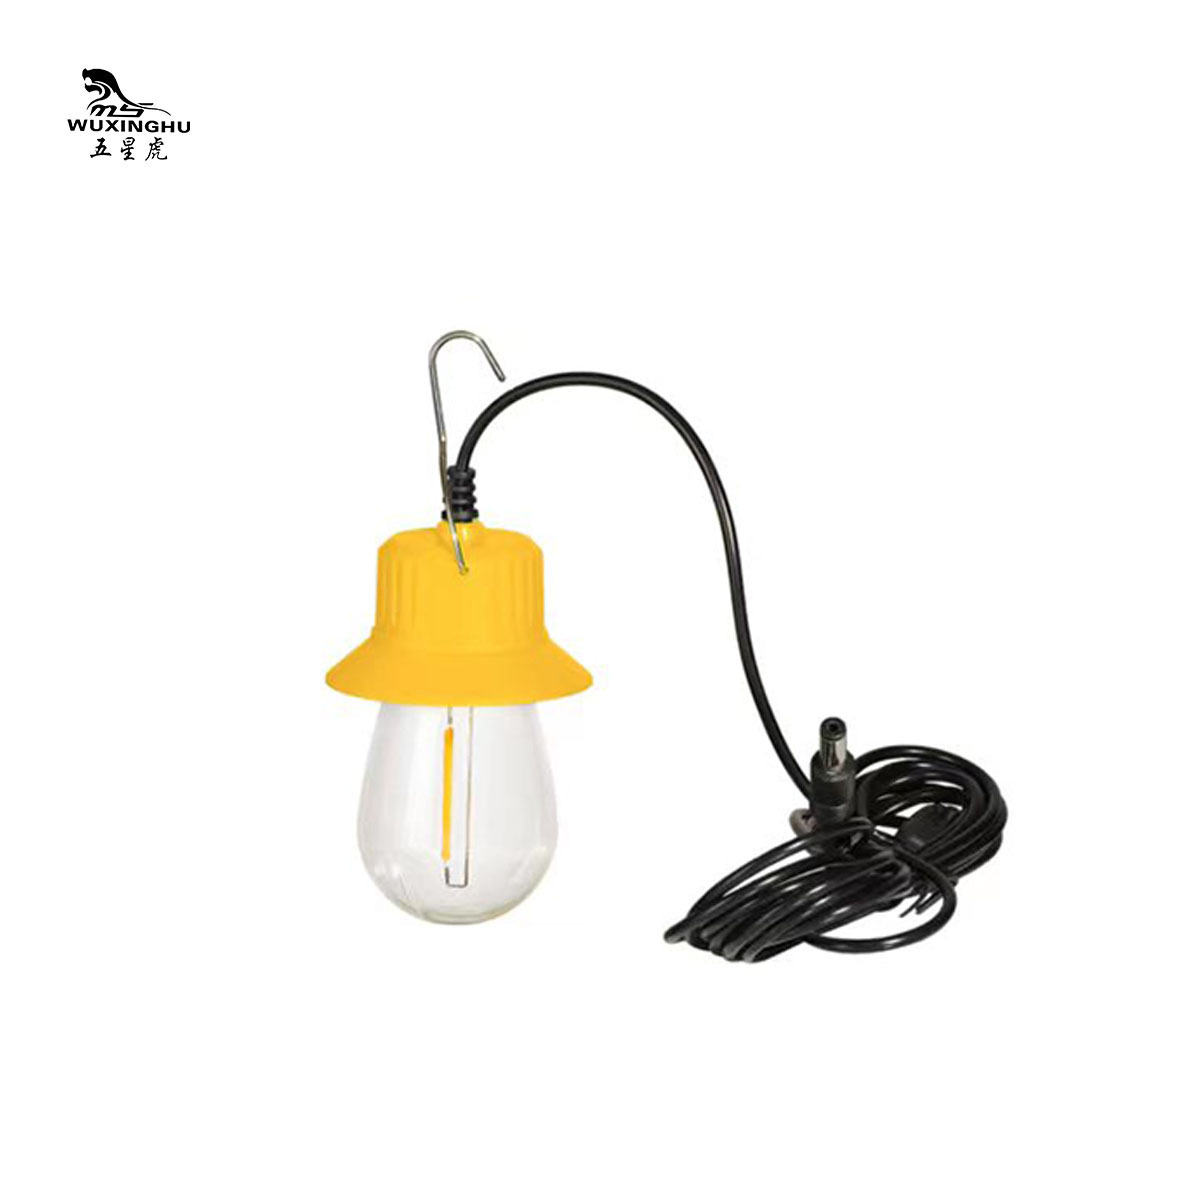 New Outdoor Led Warm Light Vintage Tungsten Bulb Camping Lantern Tent Light Ambience Light Emergency Bulb with Hook